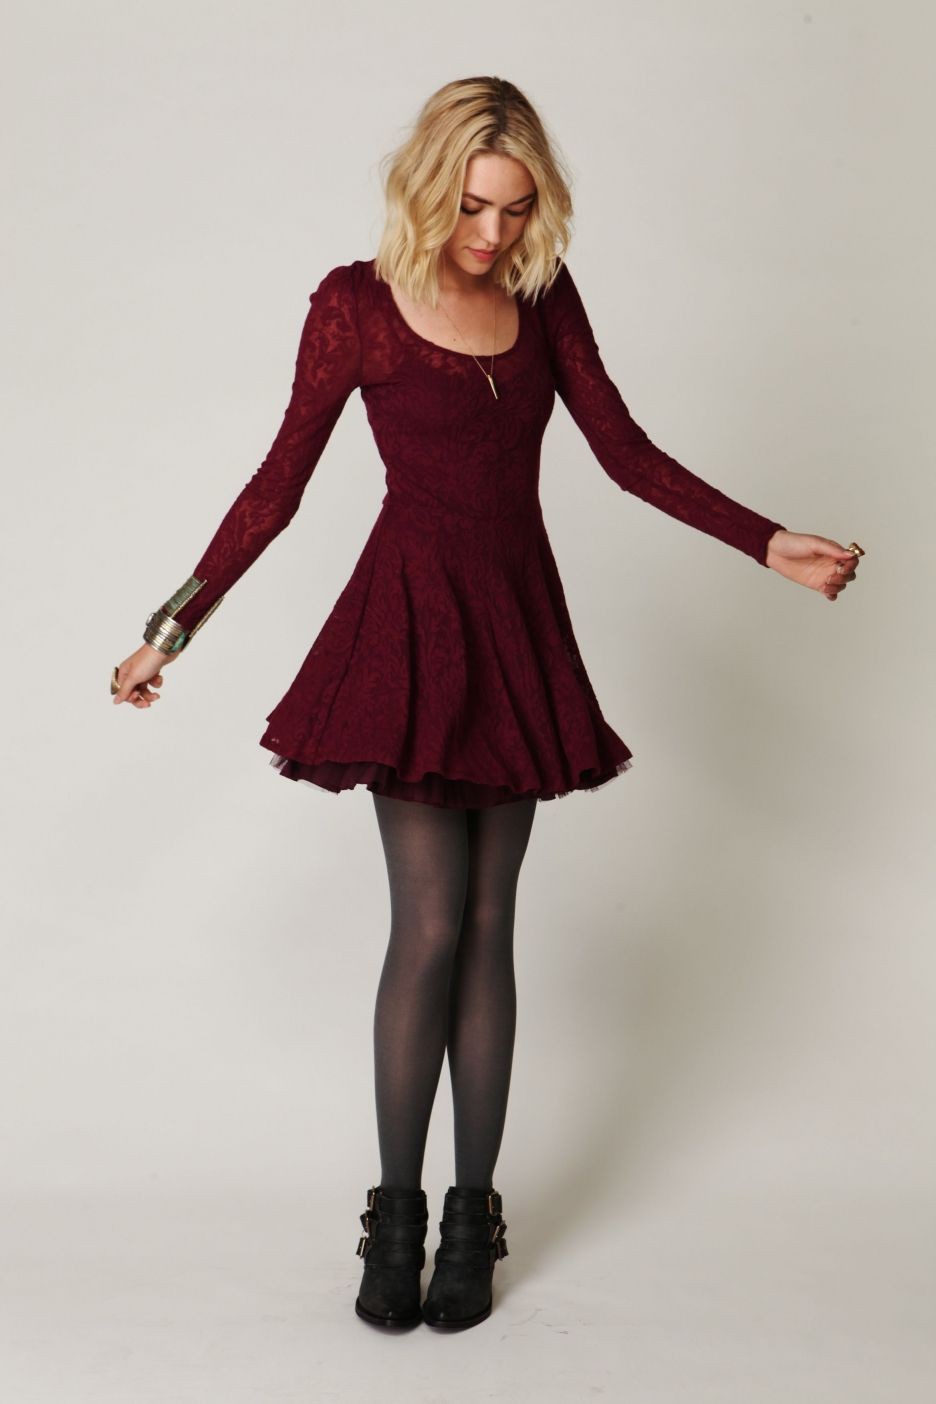 Maroon dress with black tights: party outfits,  Wedding dress,  Bridesmaid dress,  Tights outfit  